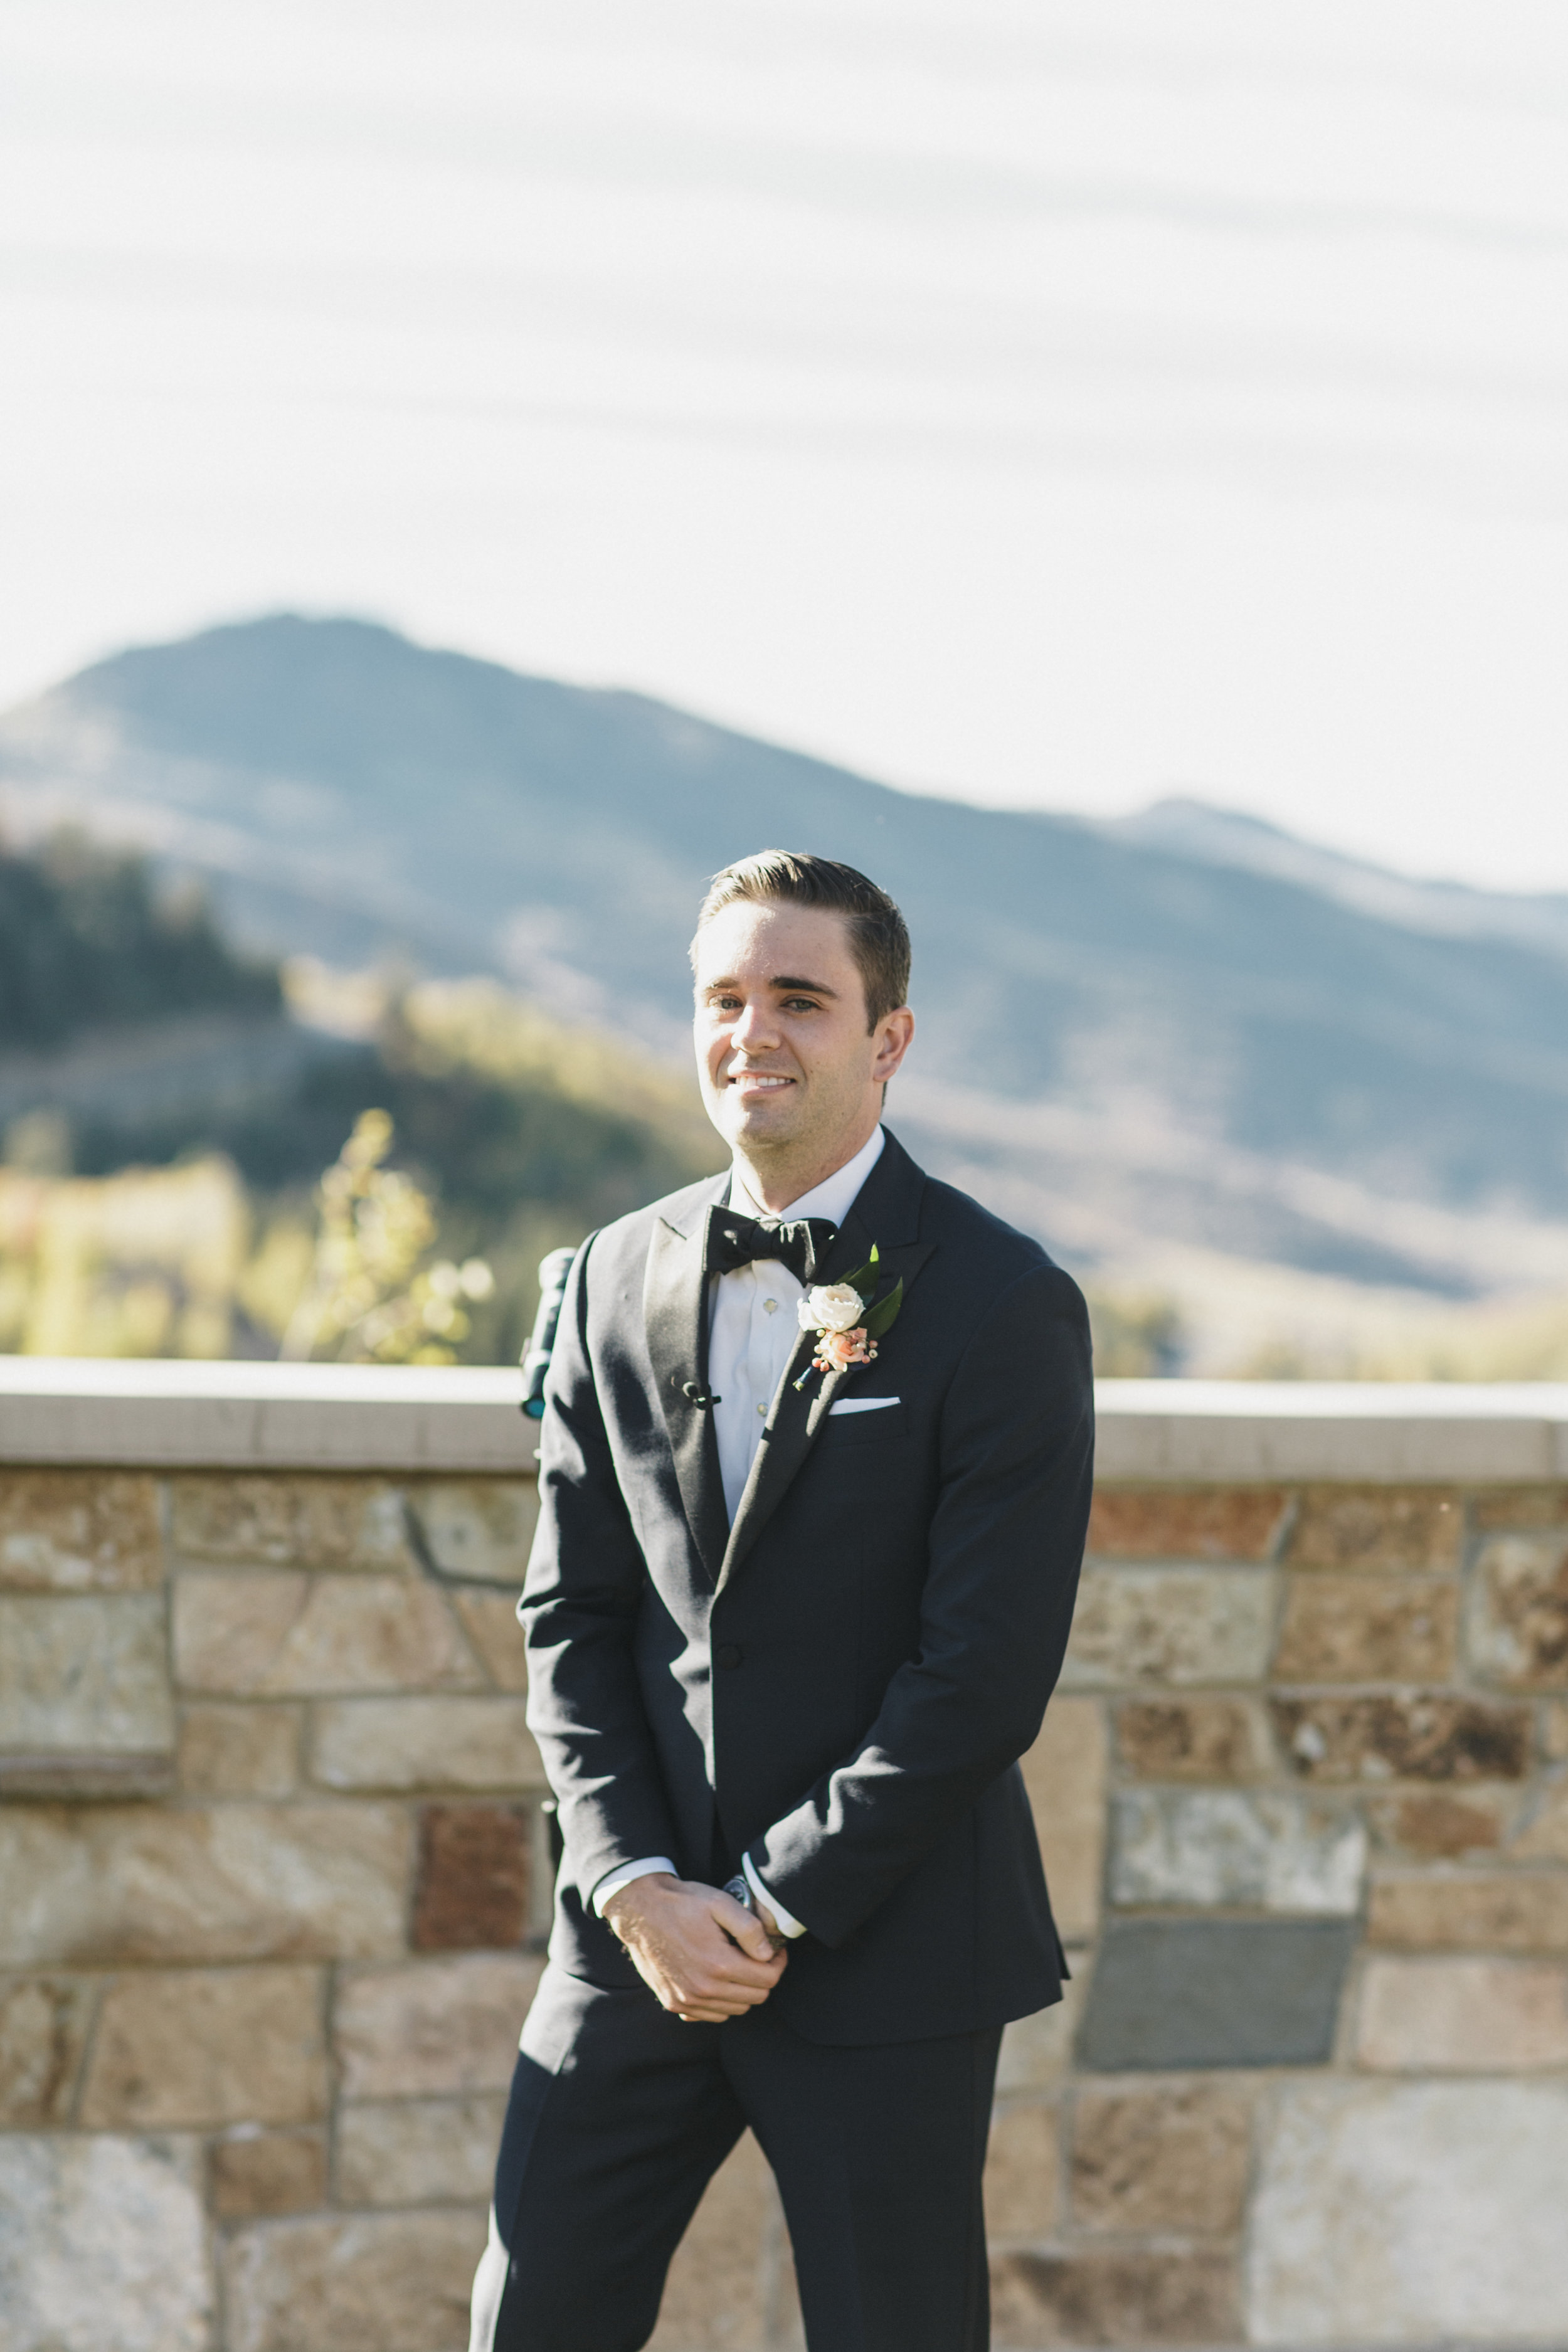 Fall Wedding | Mountain Wedding | Blush and Burgundy | Deer Valley | Michelle Leo Events | Utah Event Planner and Designer | Alixann Loosle Photography